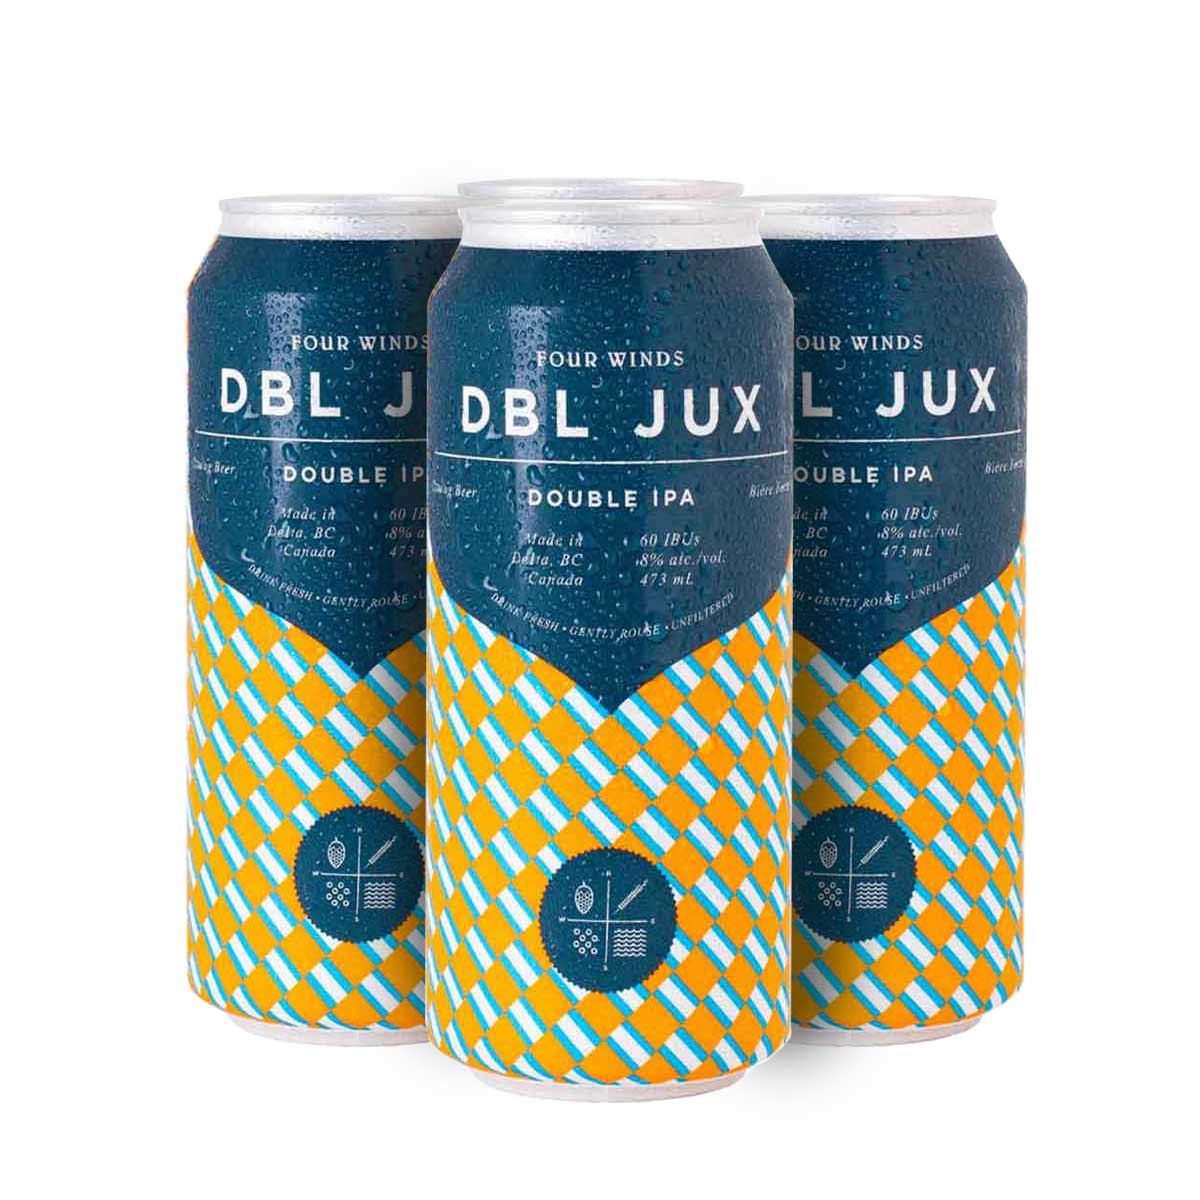 TAG Liquor Stores BC-FOUR WINDS- DBL JUX 4 PACK TALL CANS